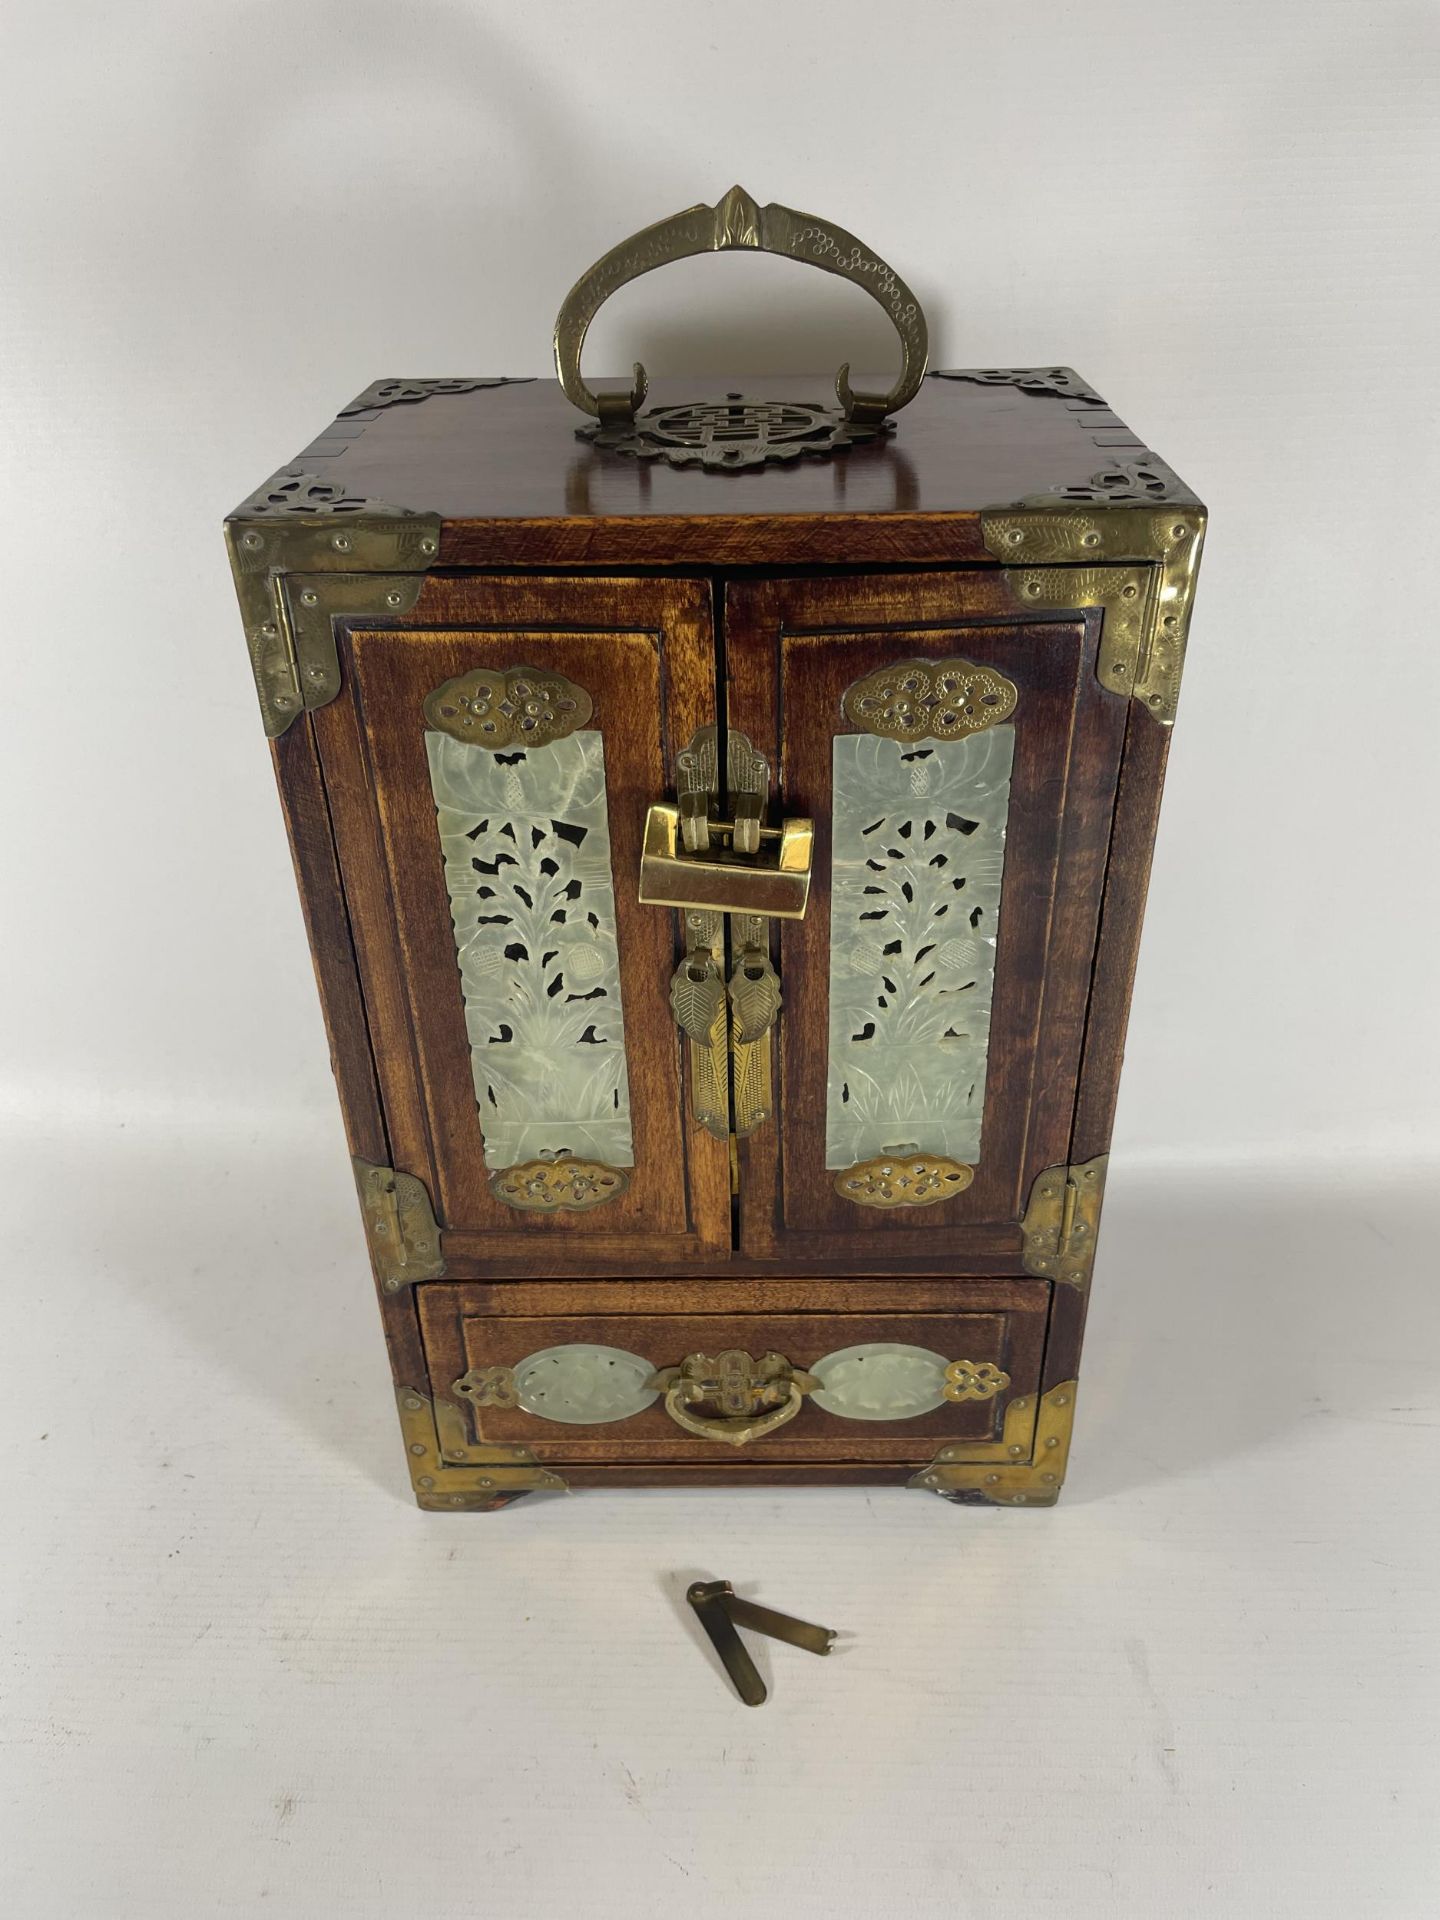 A VINTAGE ORIENTAL HARDWOOD JEWELLERY BOX WITH BRASS FITTINGS AND JADE TYPE PANELLED DESIGN WITH